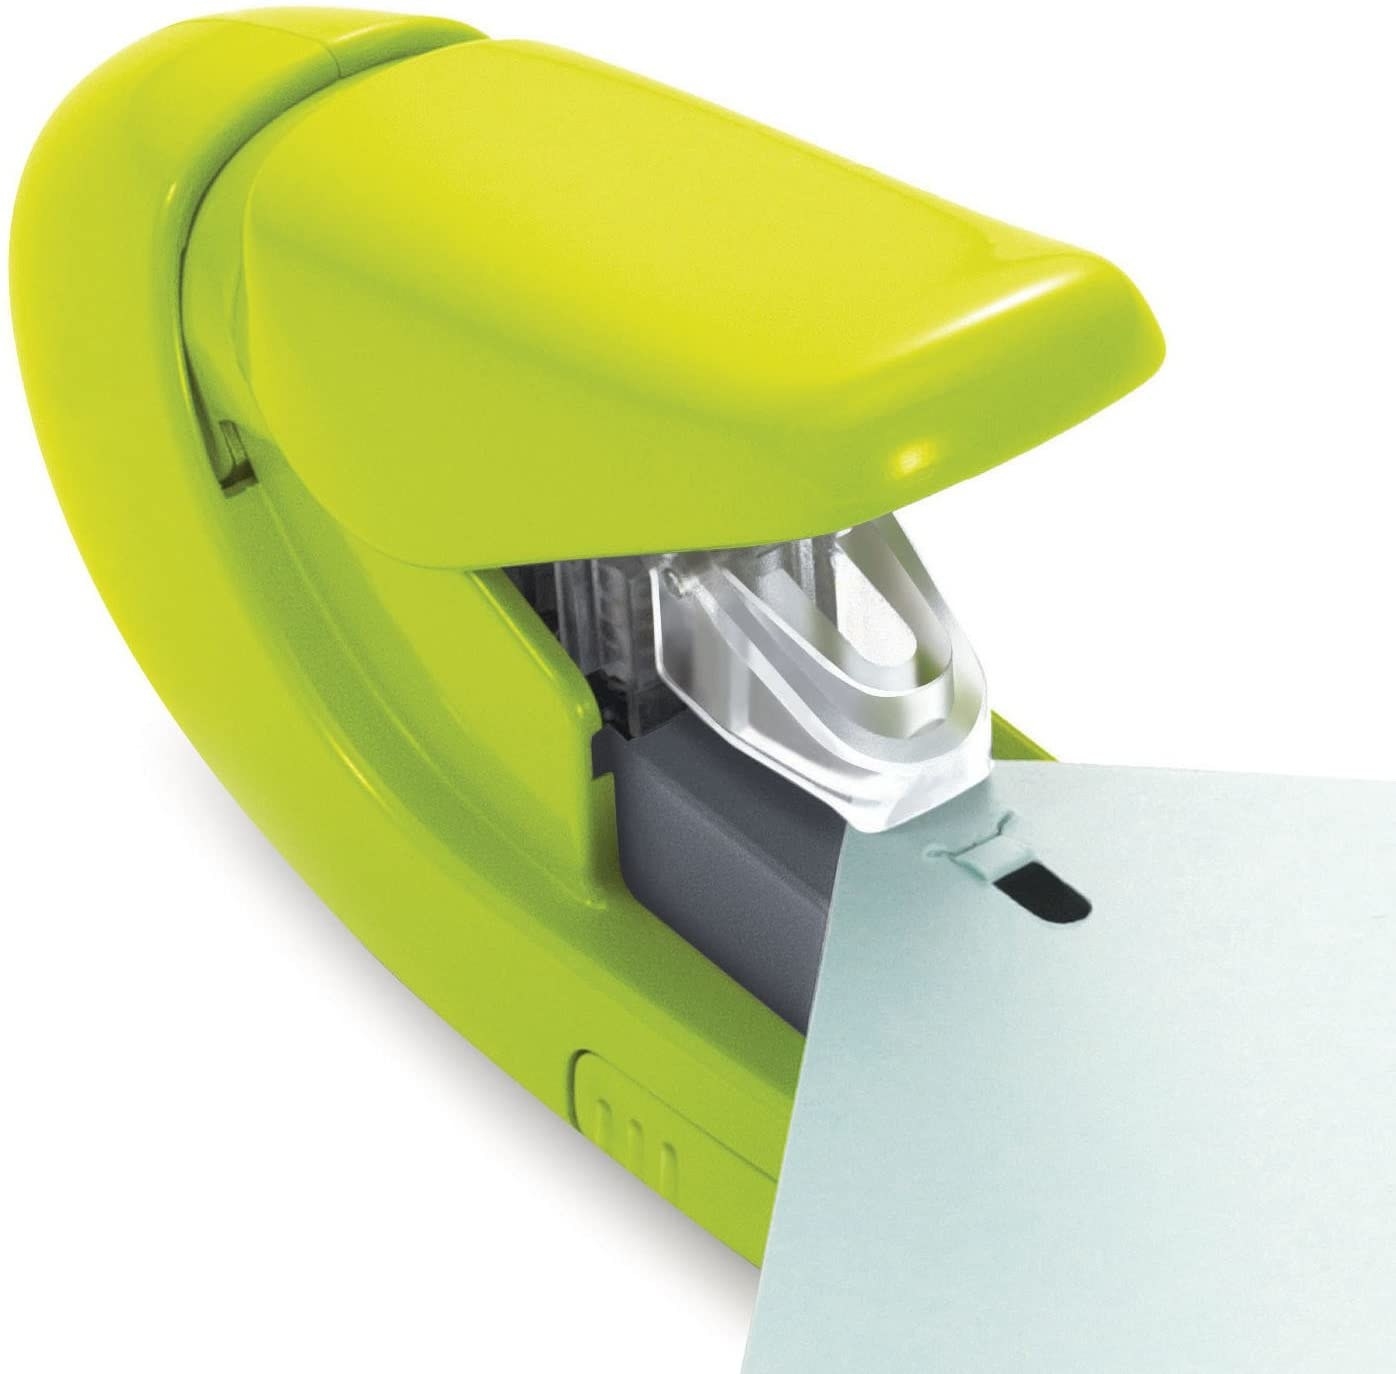 A stack of paper sitting in the teeth of a miniature staple-free stapler 